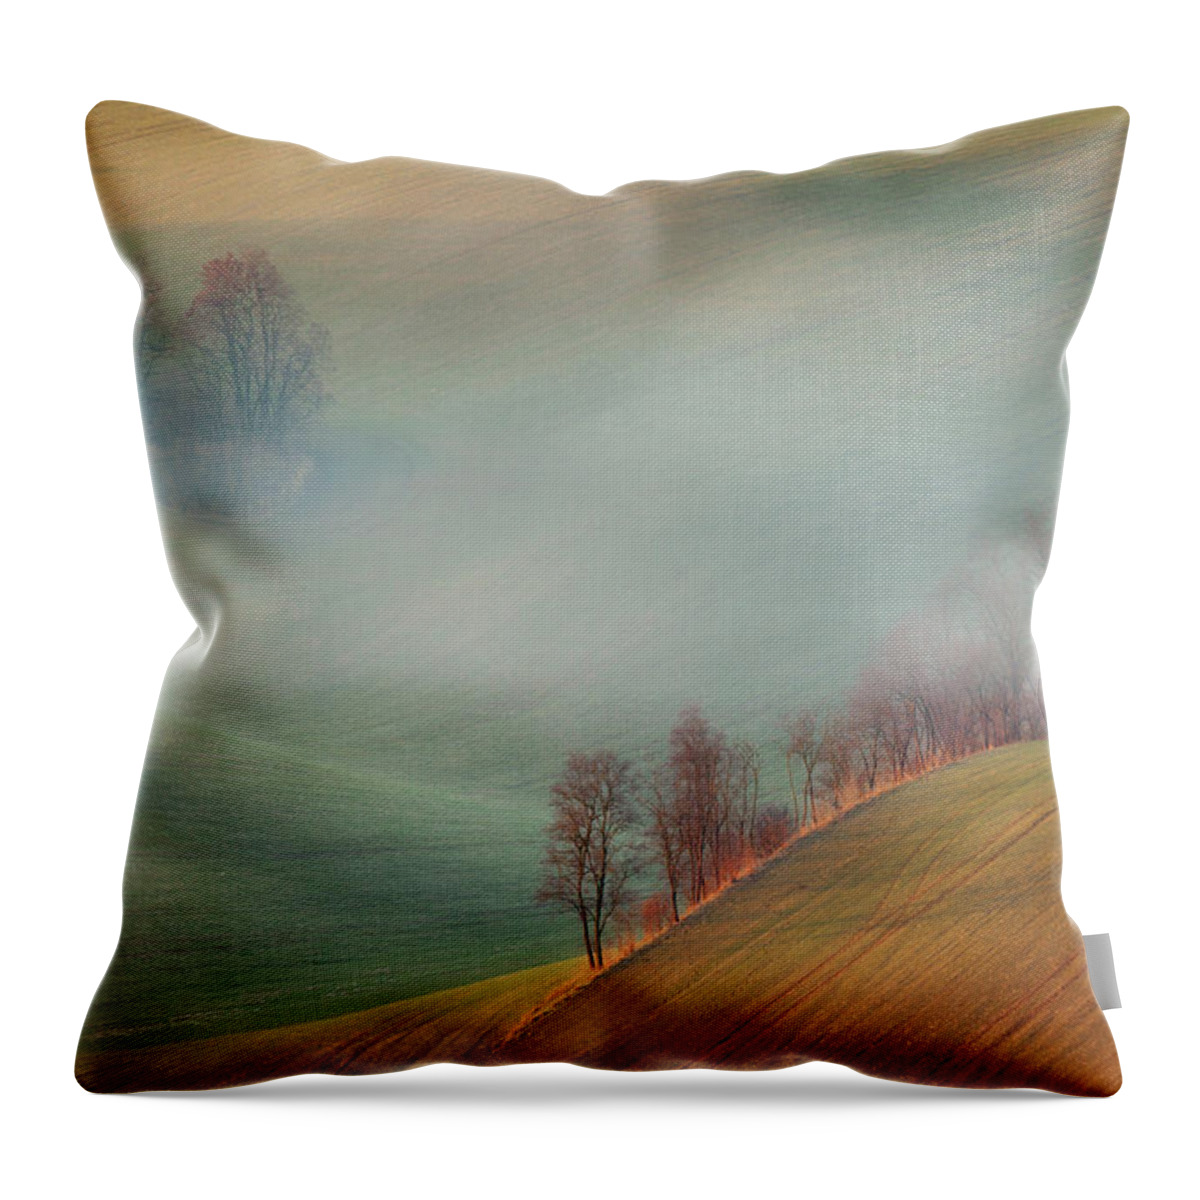 Europe Throw Pillow featuring the photograph Moravian landscape by Piotr Skrzypiec